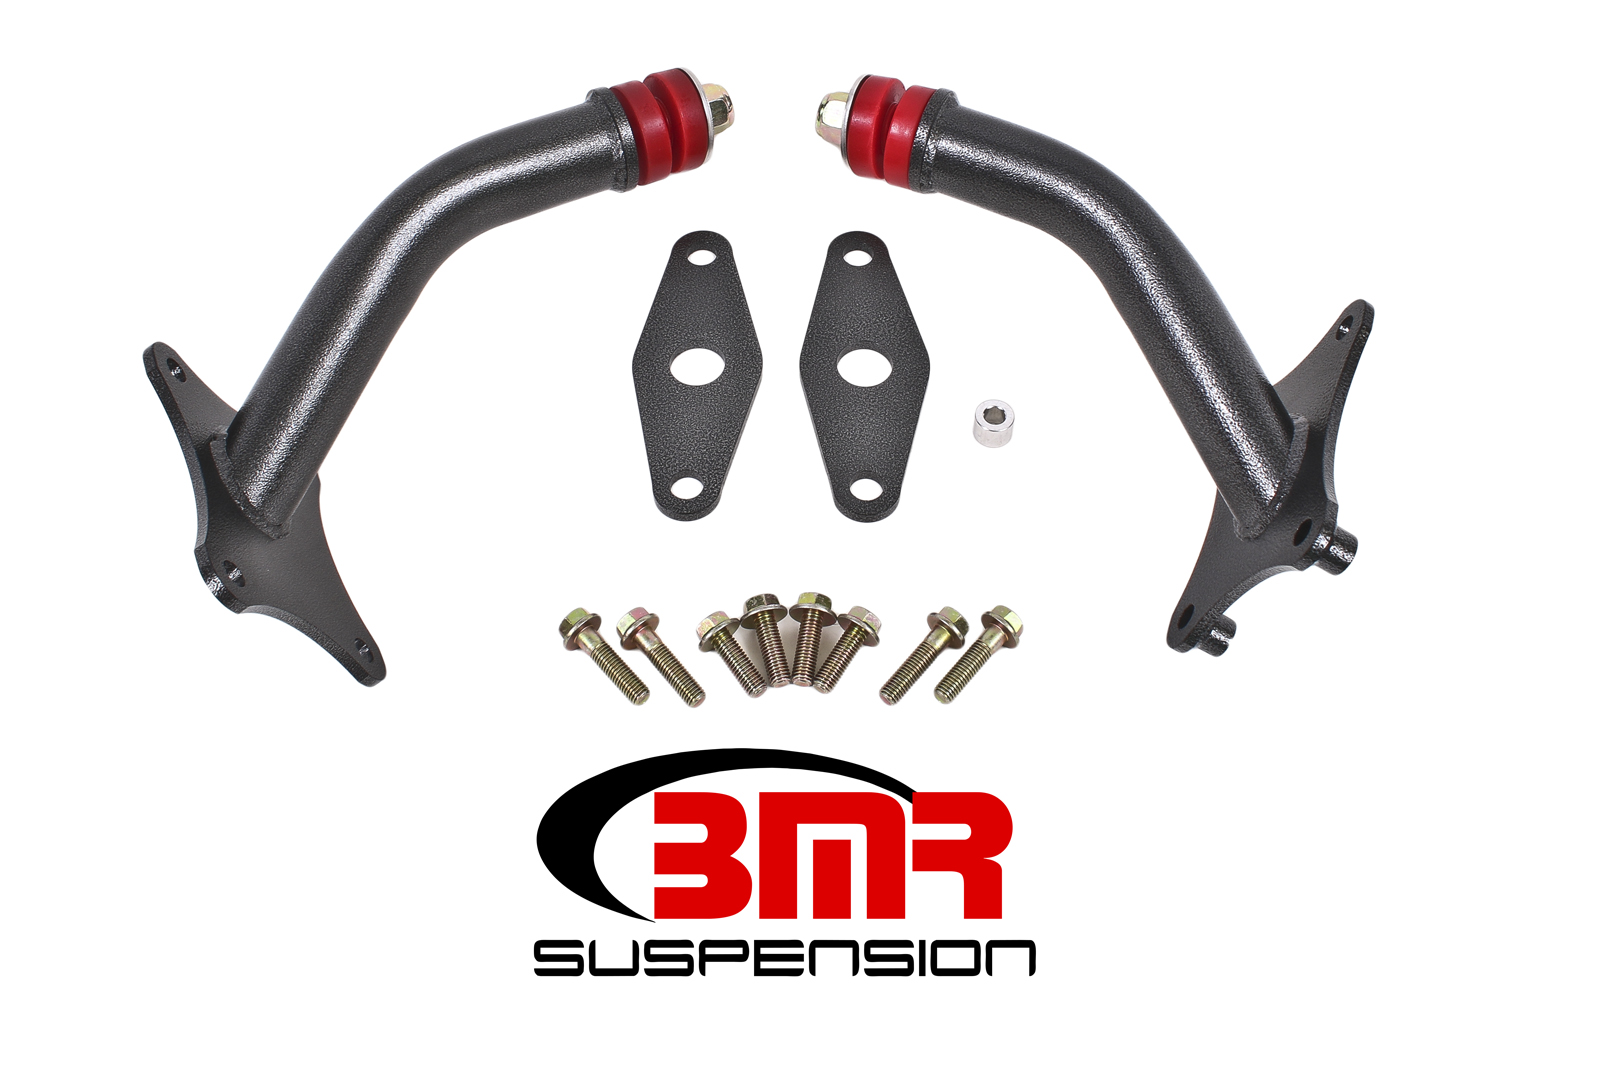 Motor Mount Kit With Integrated Stands, Poly Bushings, Fits all 2016-newer Chevrolet Camaro, BMR Suspension - MM010H